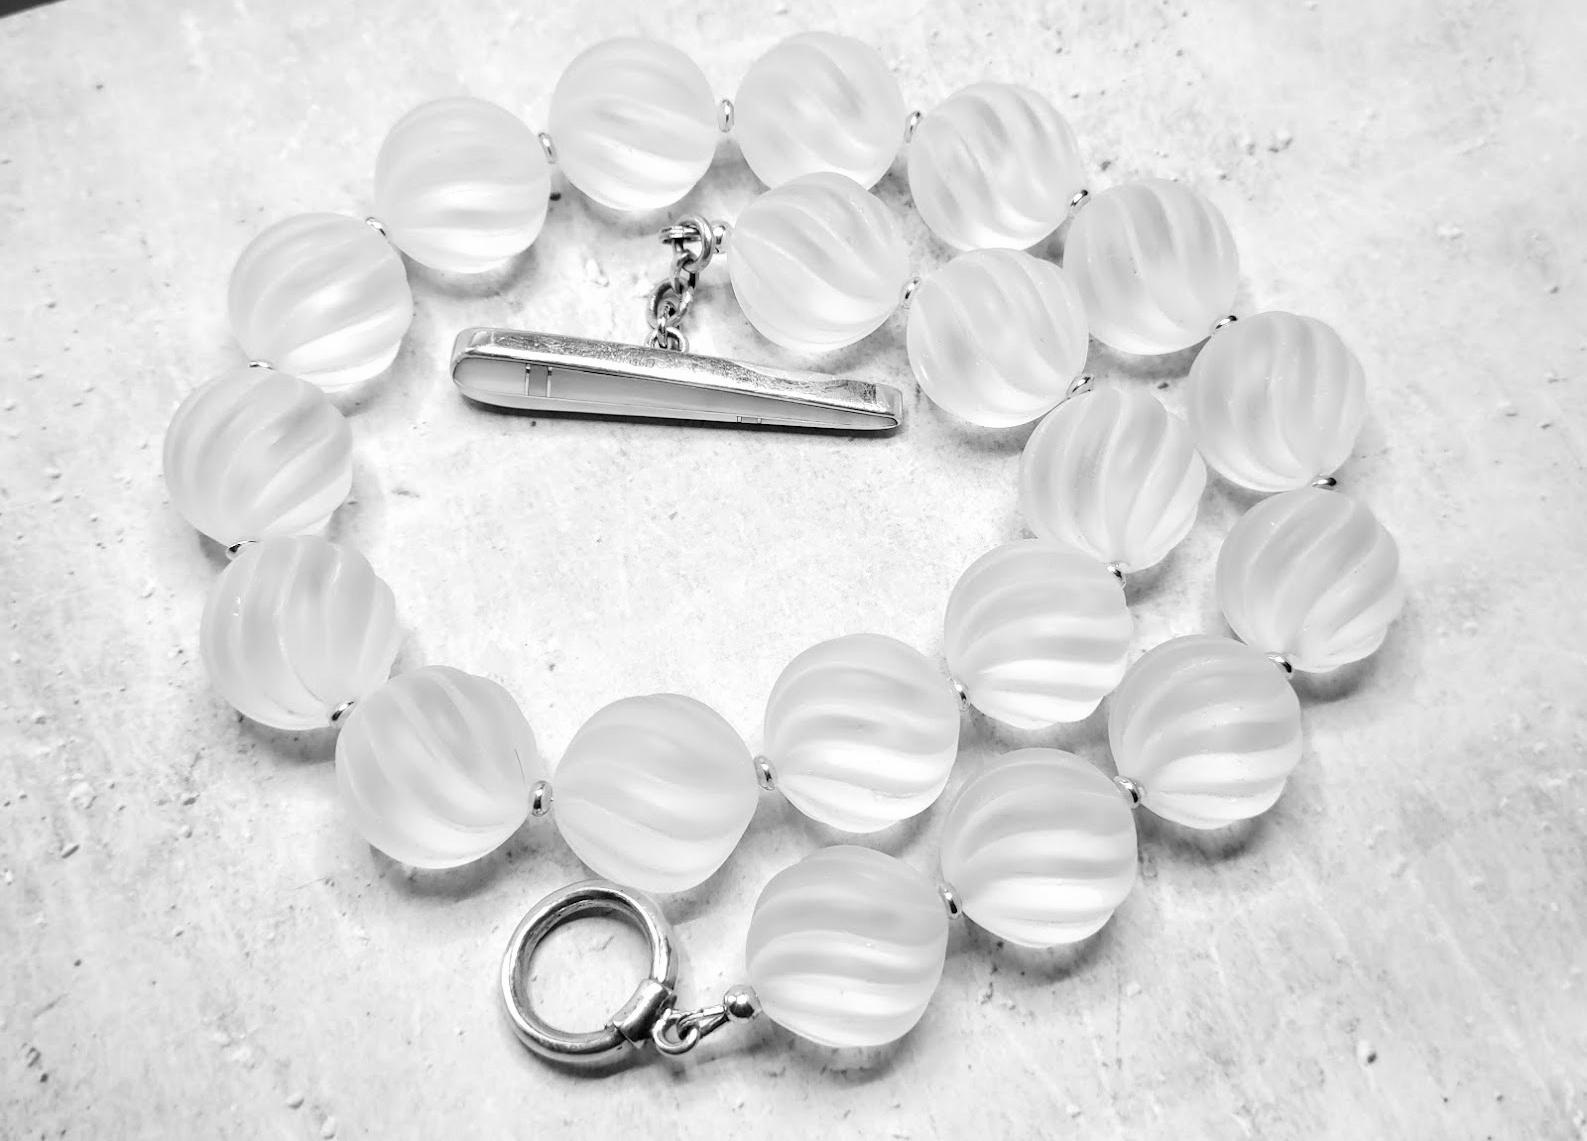 Genuine Swirl Carved Frosted Rock Crystal Beaded Necklace with Beautiful Mother of Pearl Toggle Clasp

The length of the necklace is 17 inches (43 cm). The size of the swirl carved beads is 18 mm.
The beads are like frozen smooth ice on a river.
In